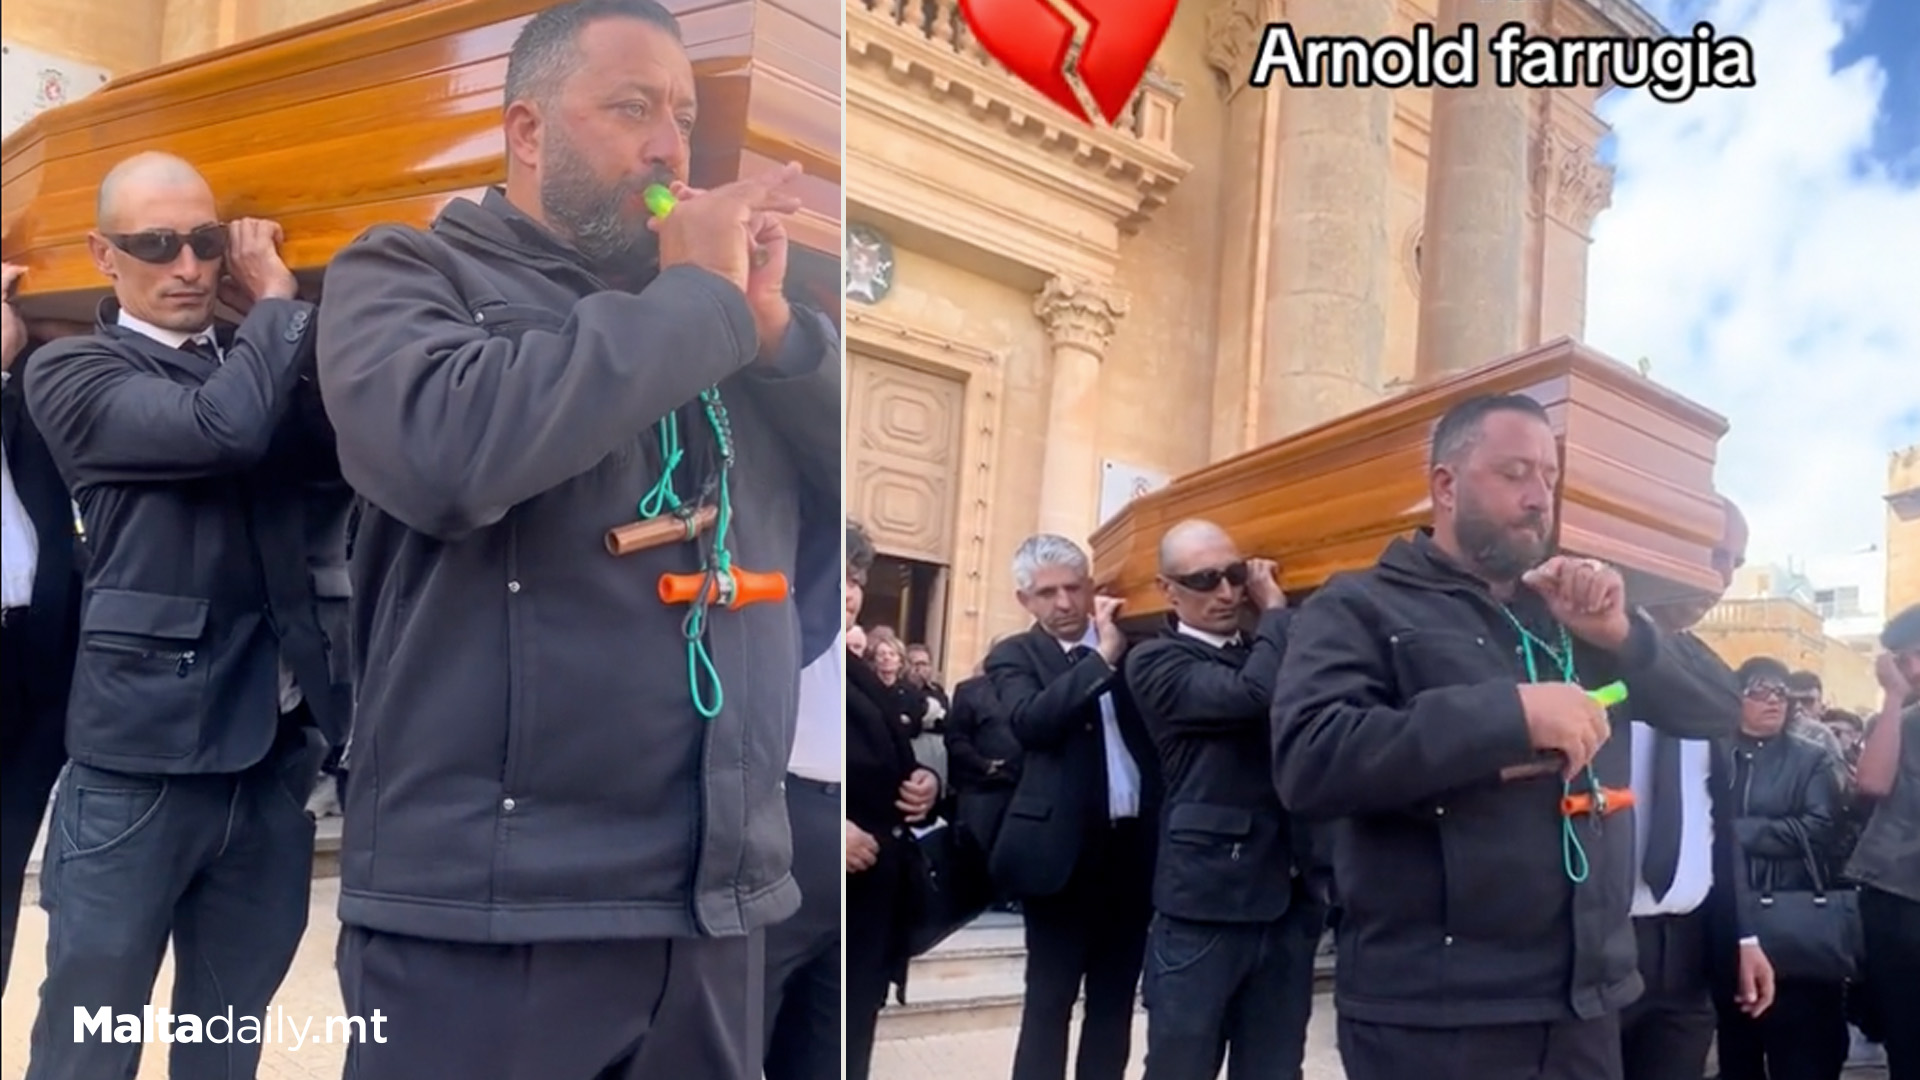 Bird Callers Played During Hunter Arnold Farrugia's Funeral